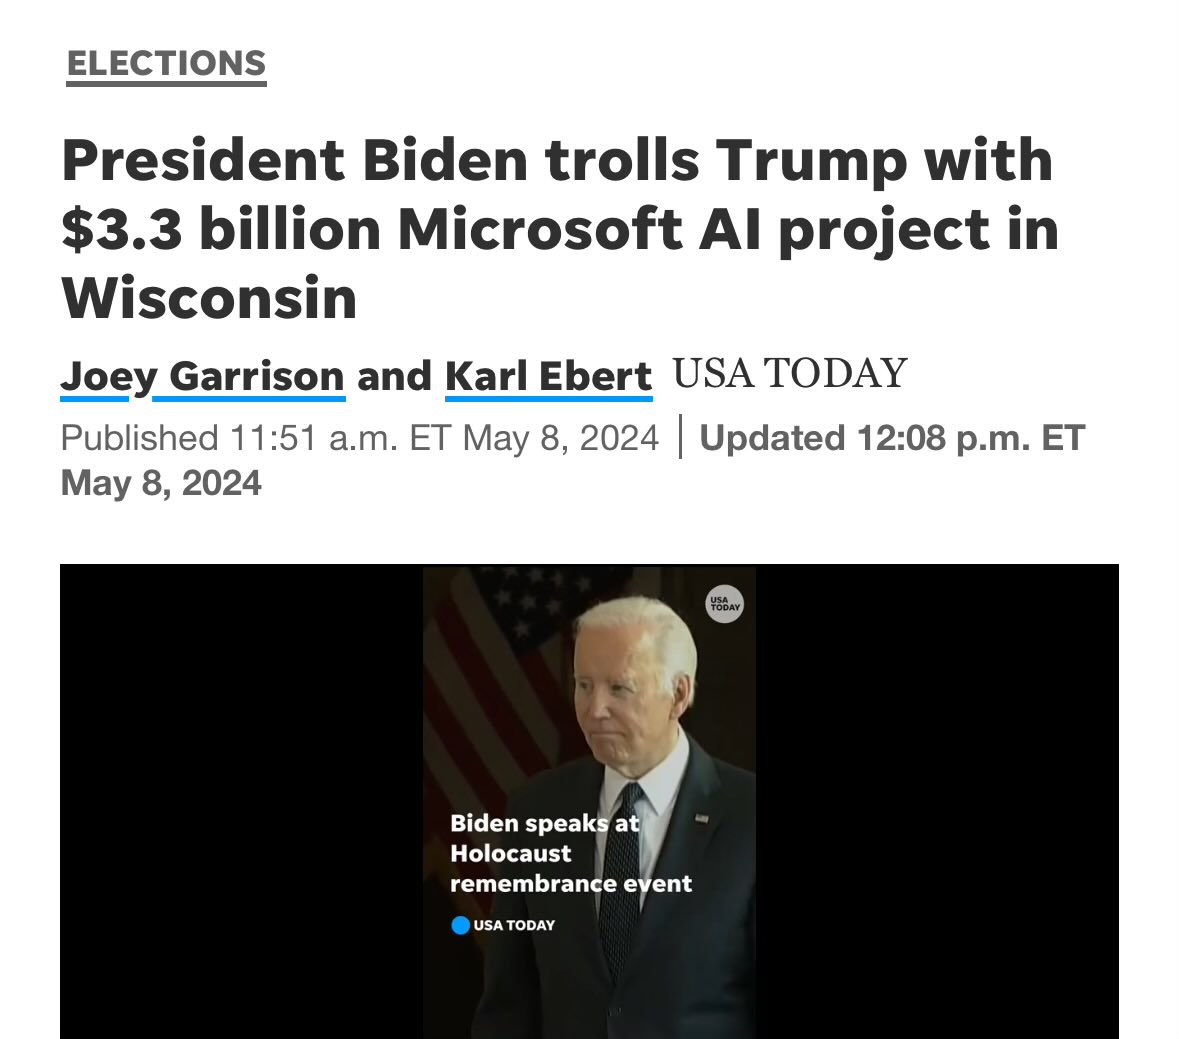 Microsoft enters the election